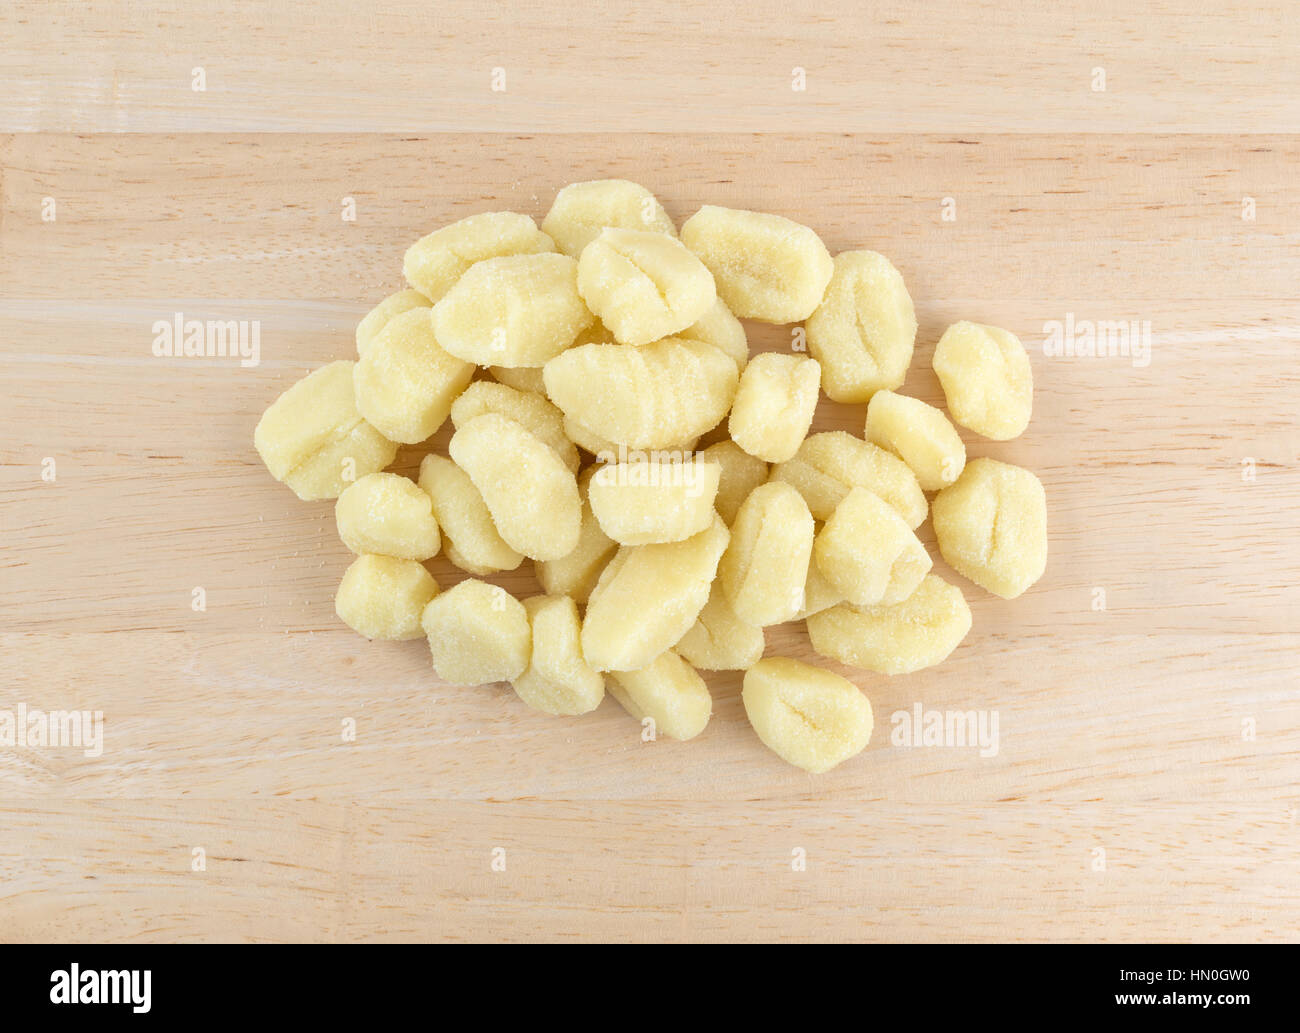 Top view of a portion of plain potato gnocchi on a wood counter top. Stock Photo